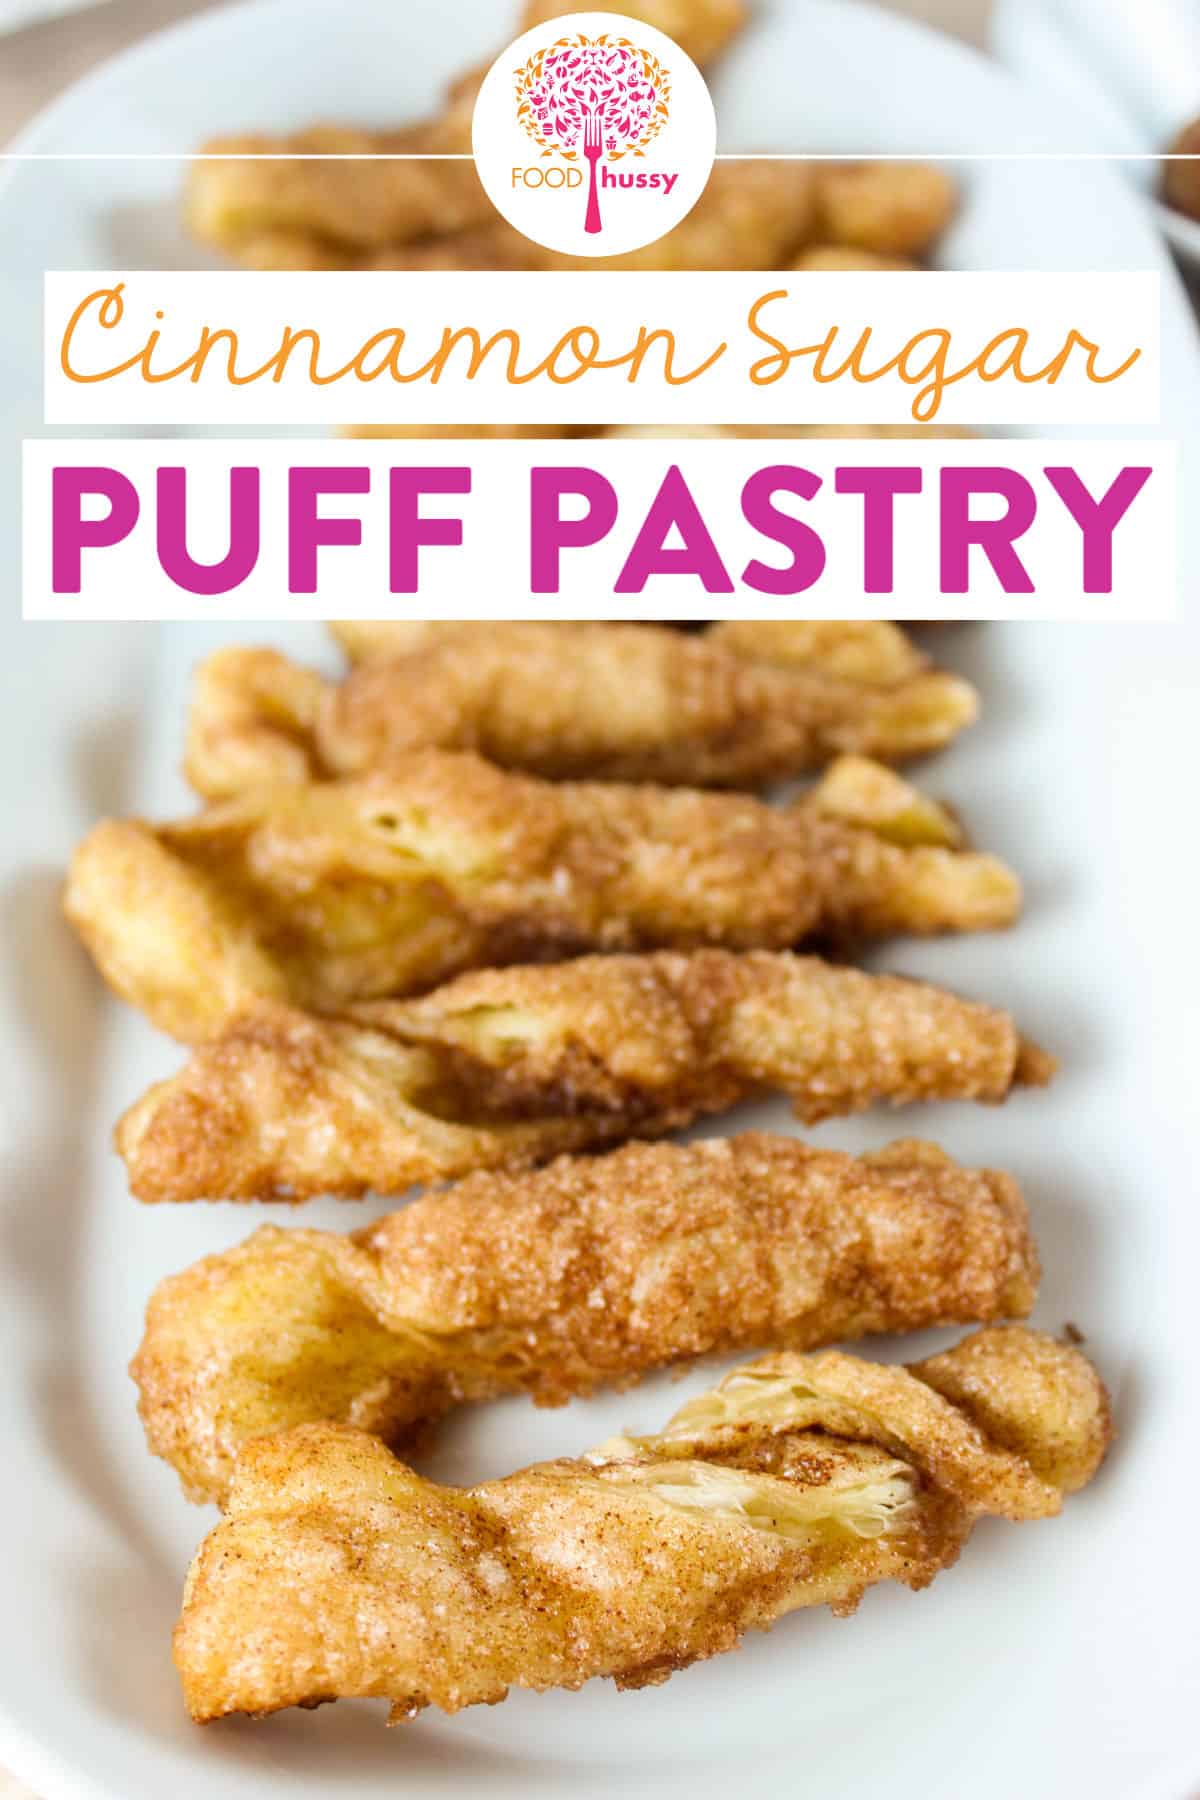 Cinnamon Sugar Puff Pastry is a delicious and super-easy dessert to make! I love the light and airy puff pastry coated in sweet cinnamon sugar (and butter!).  via @foodhussy